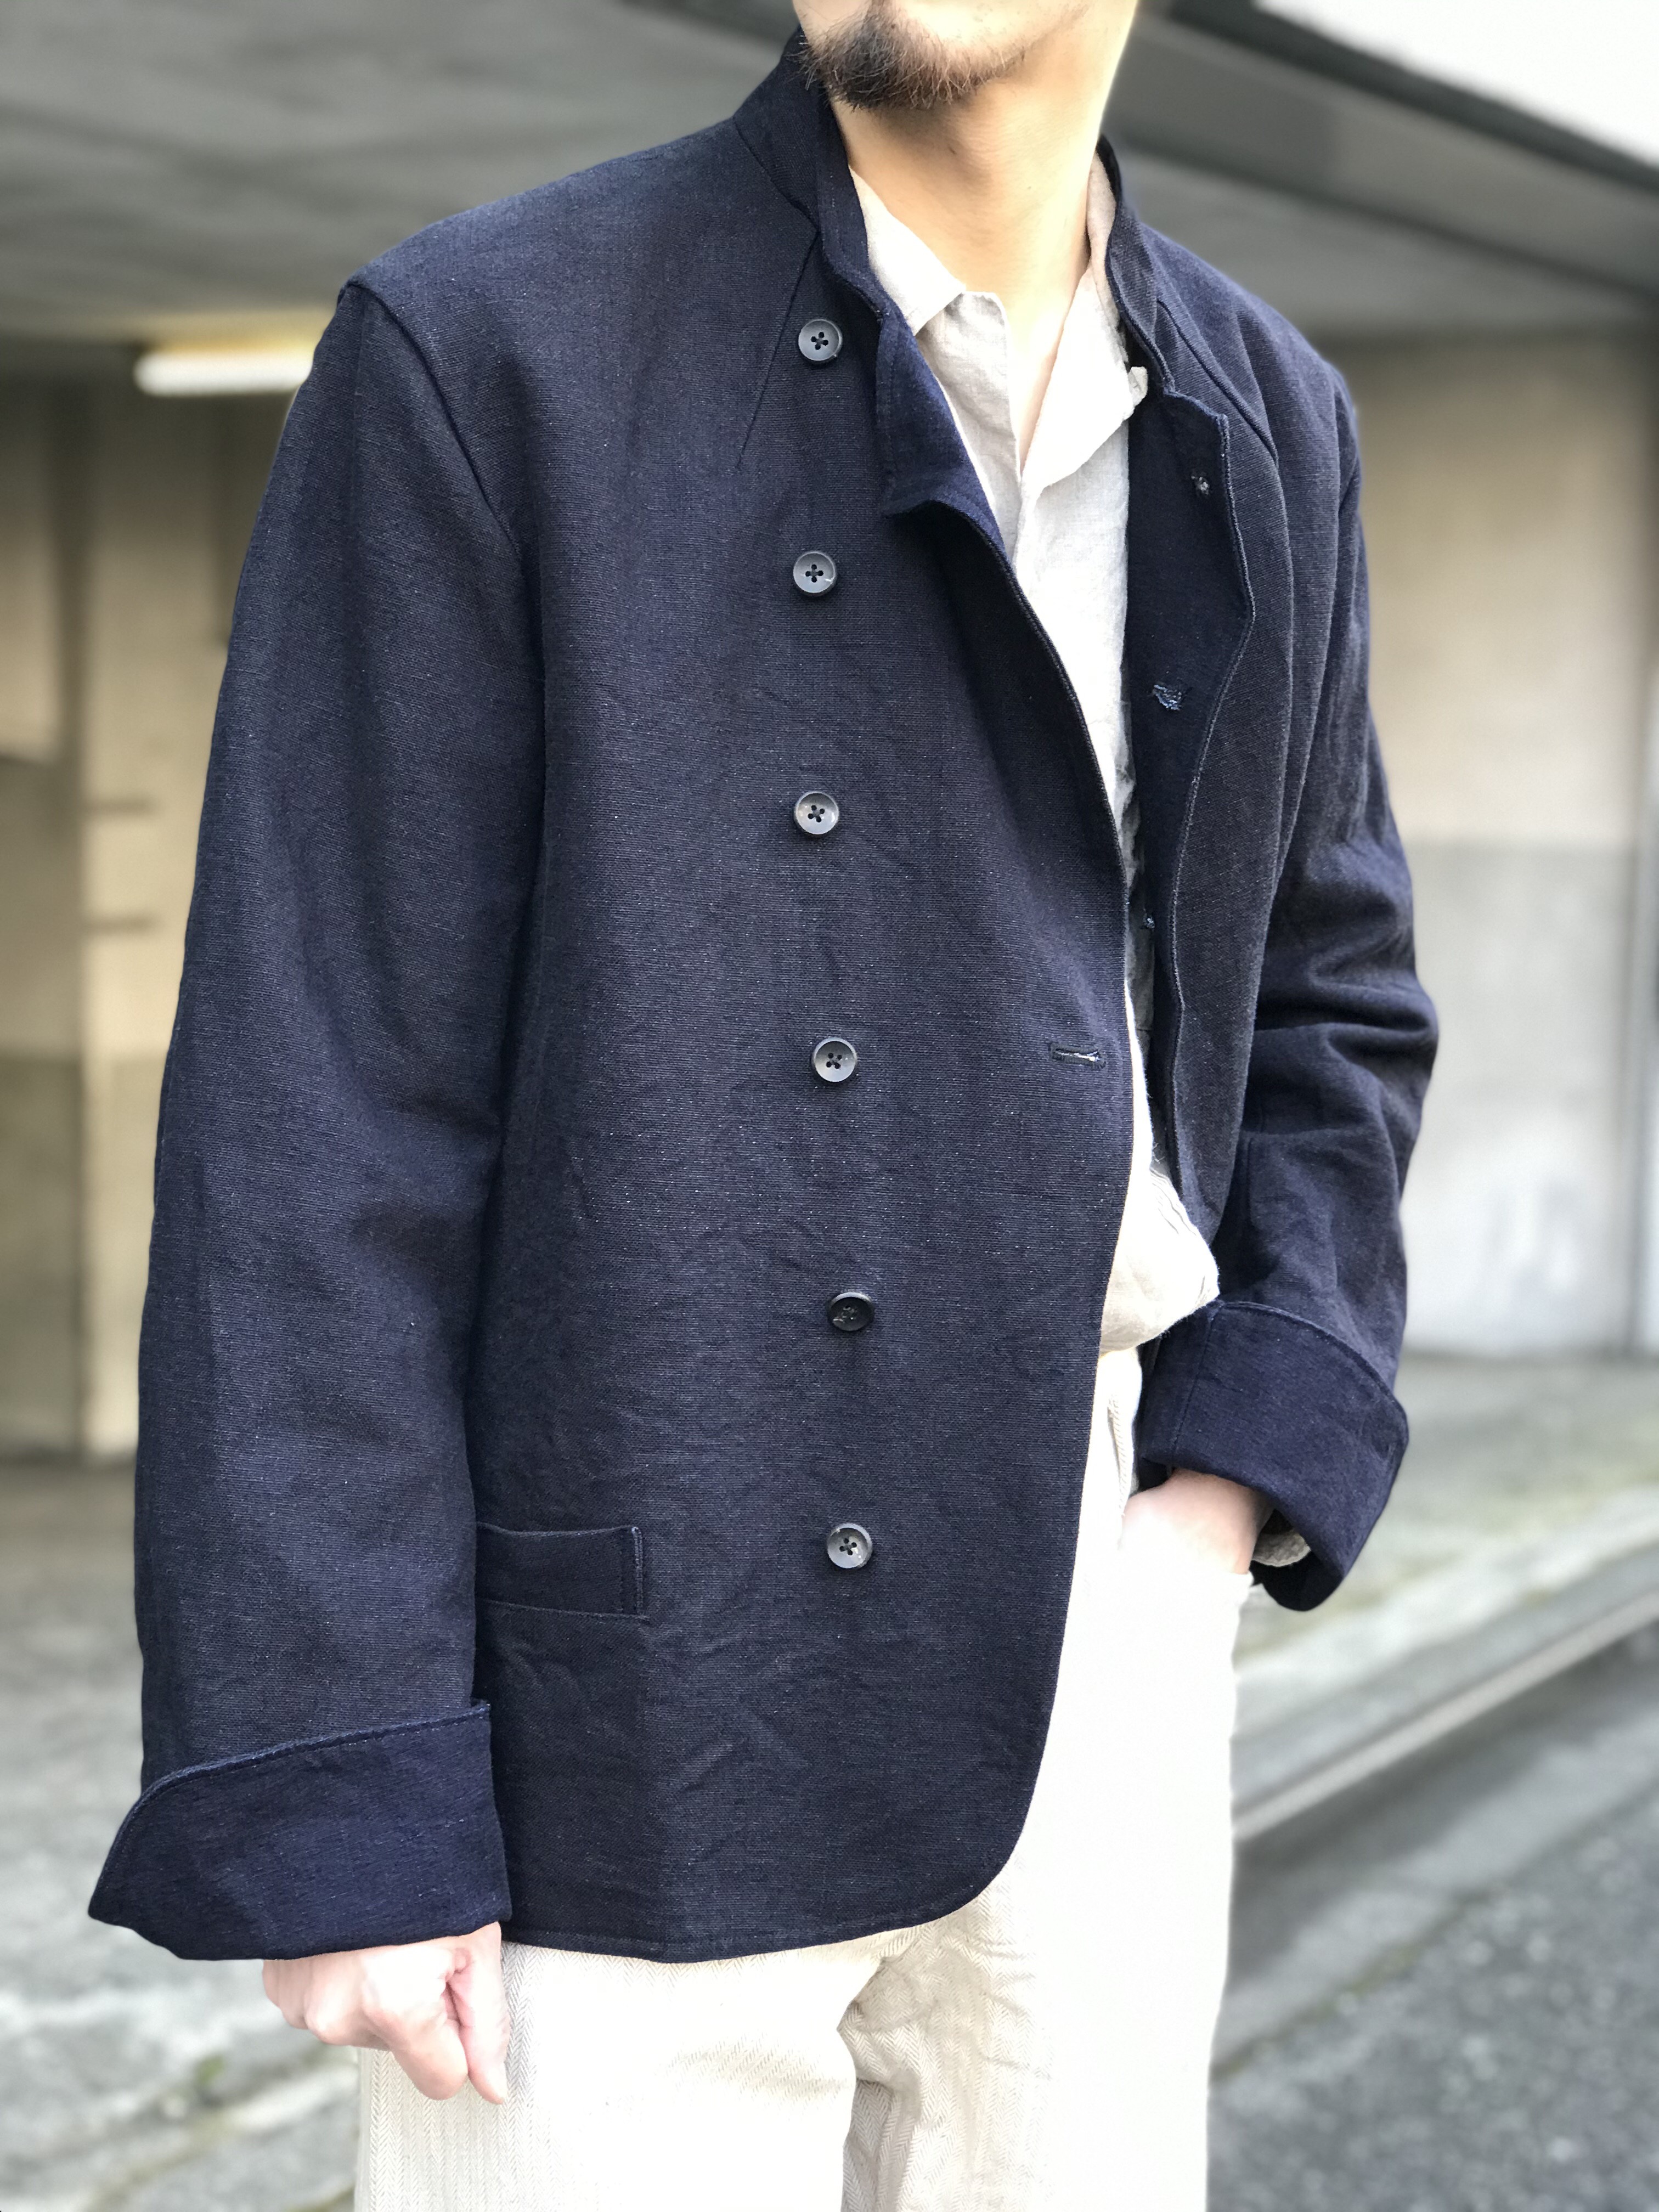 sus-sous 20ss fourth delivery | ARCH TOKYO